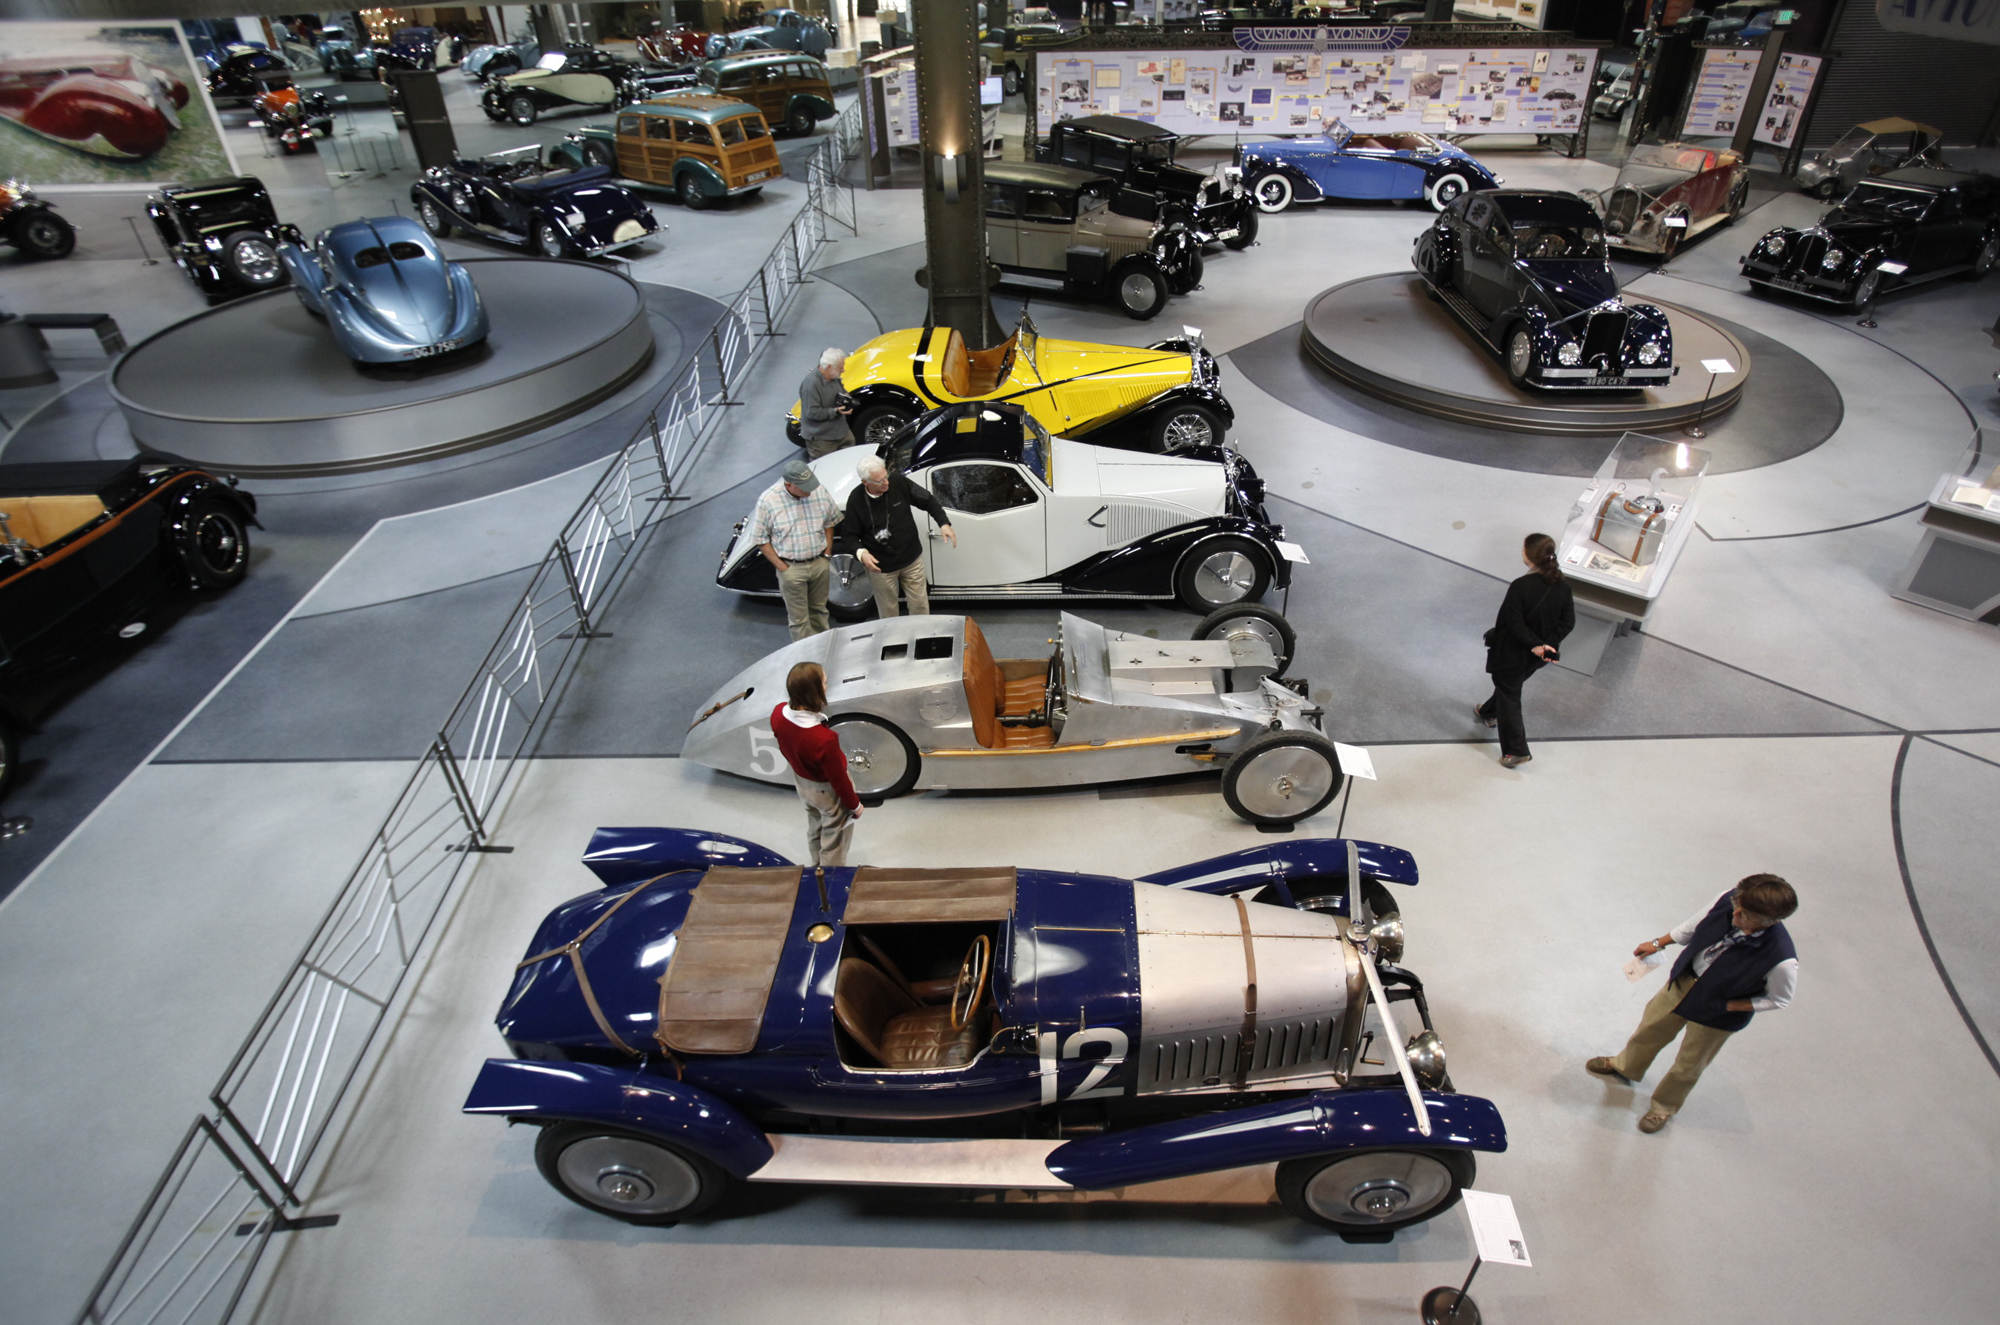 A view of the display floor at the Mullin Automotive Museum in Oxnard, California